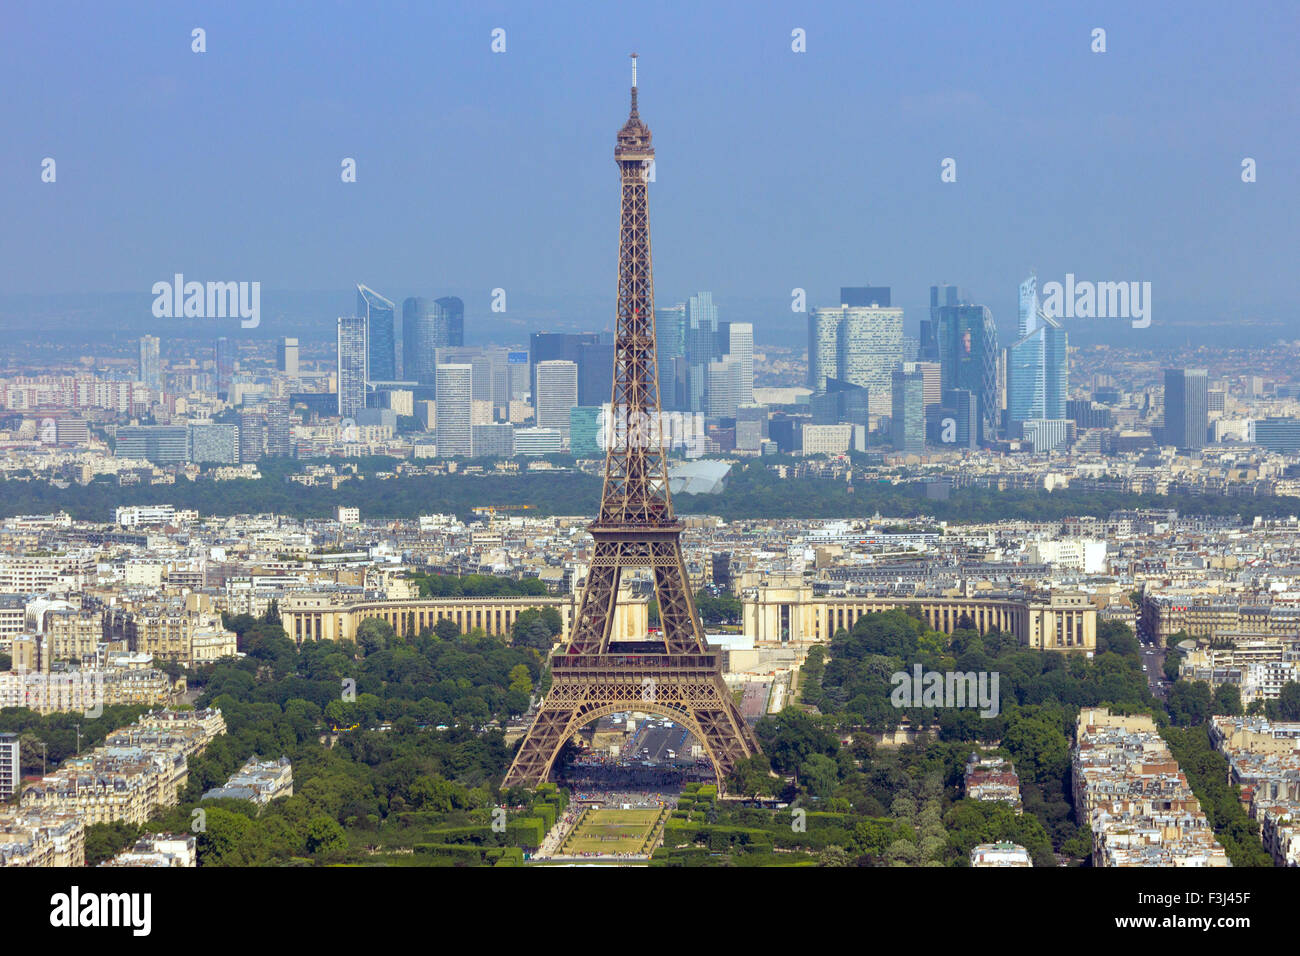 View on Paris and the Eiffel Tower. The Eiffel tower was erected in 1889 and has become both a global cultural icon of France an Stock Photo